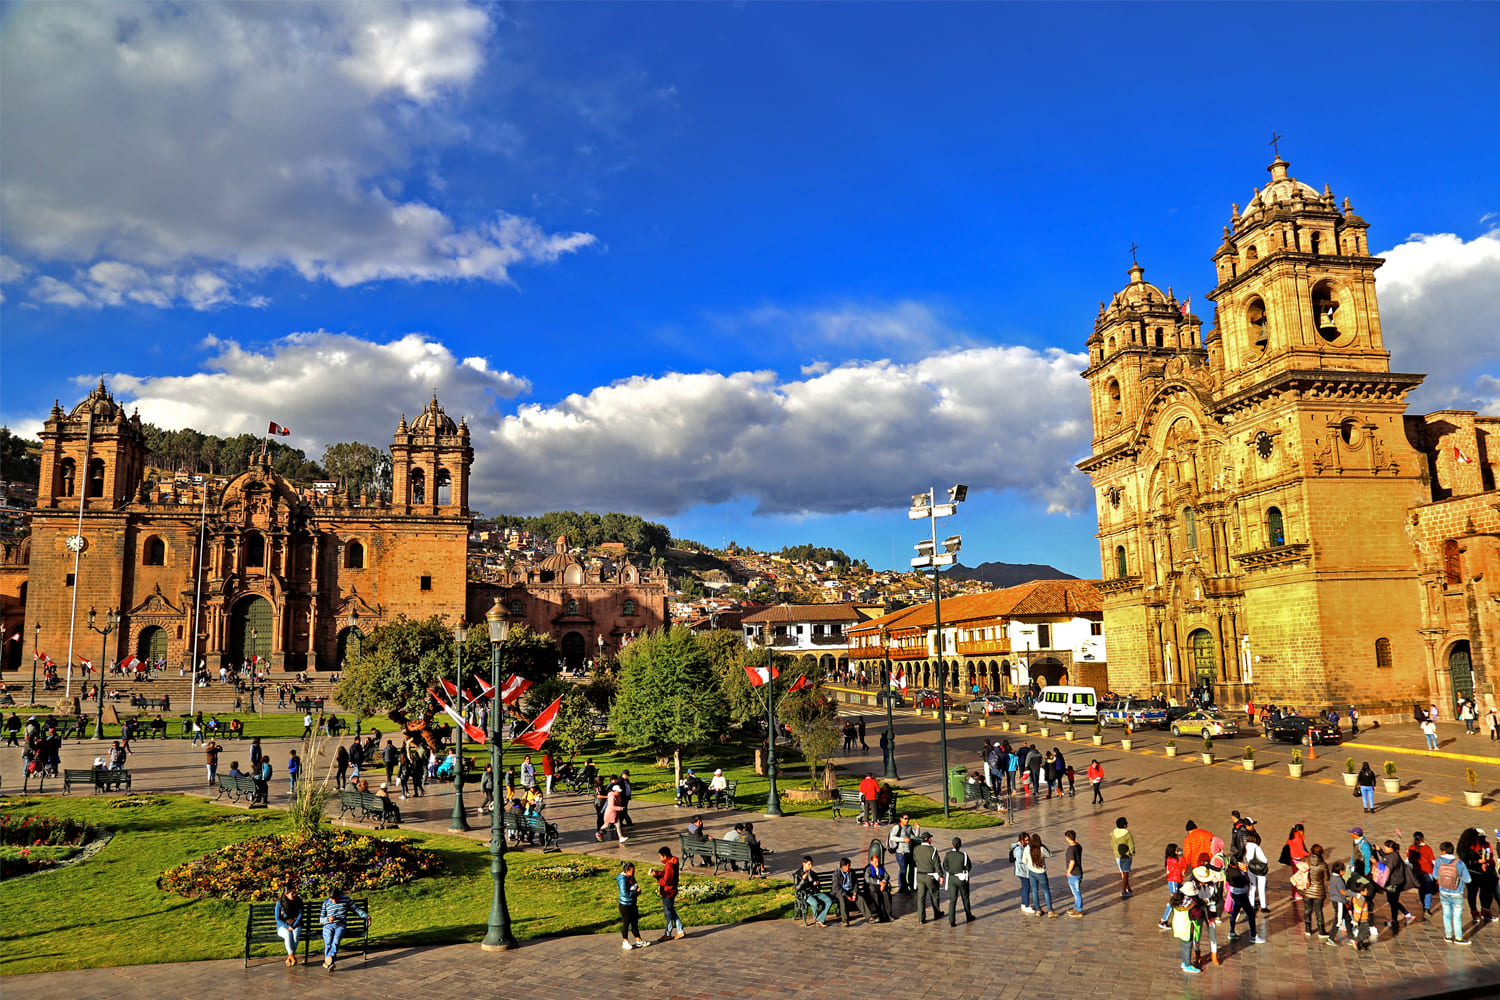 Offer of accommodation in Peru